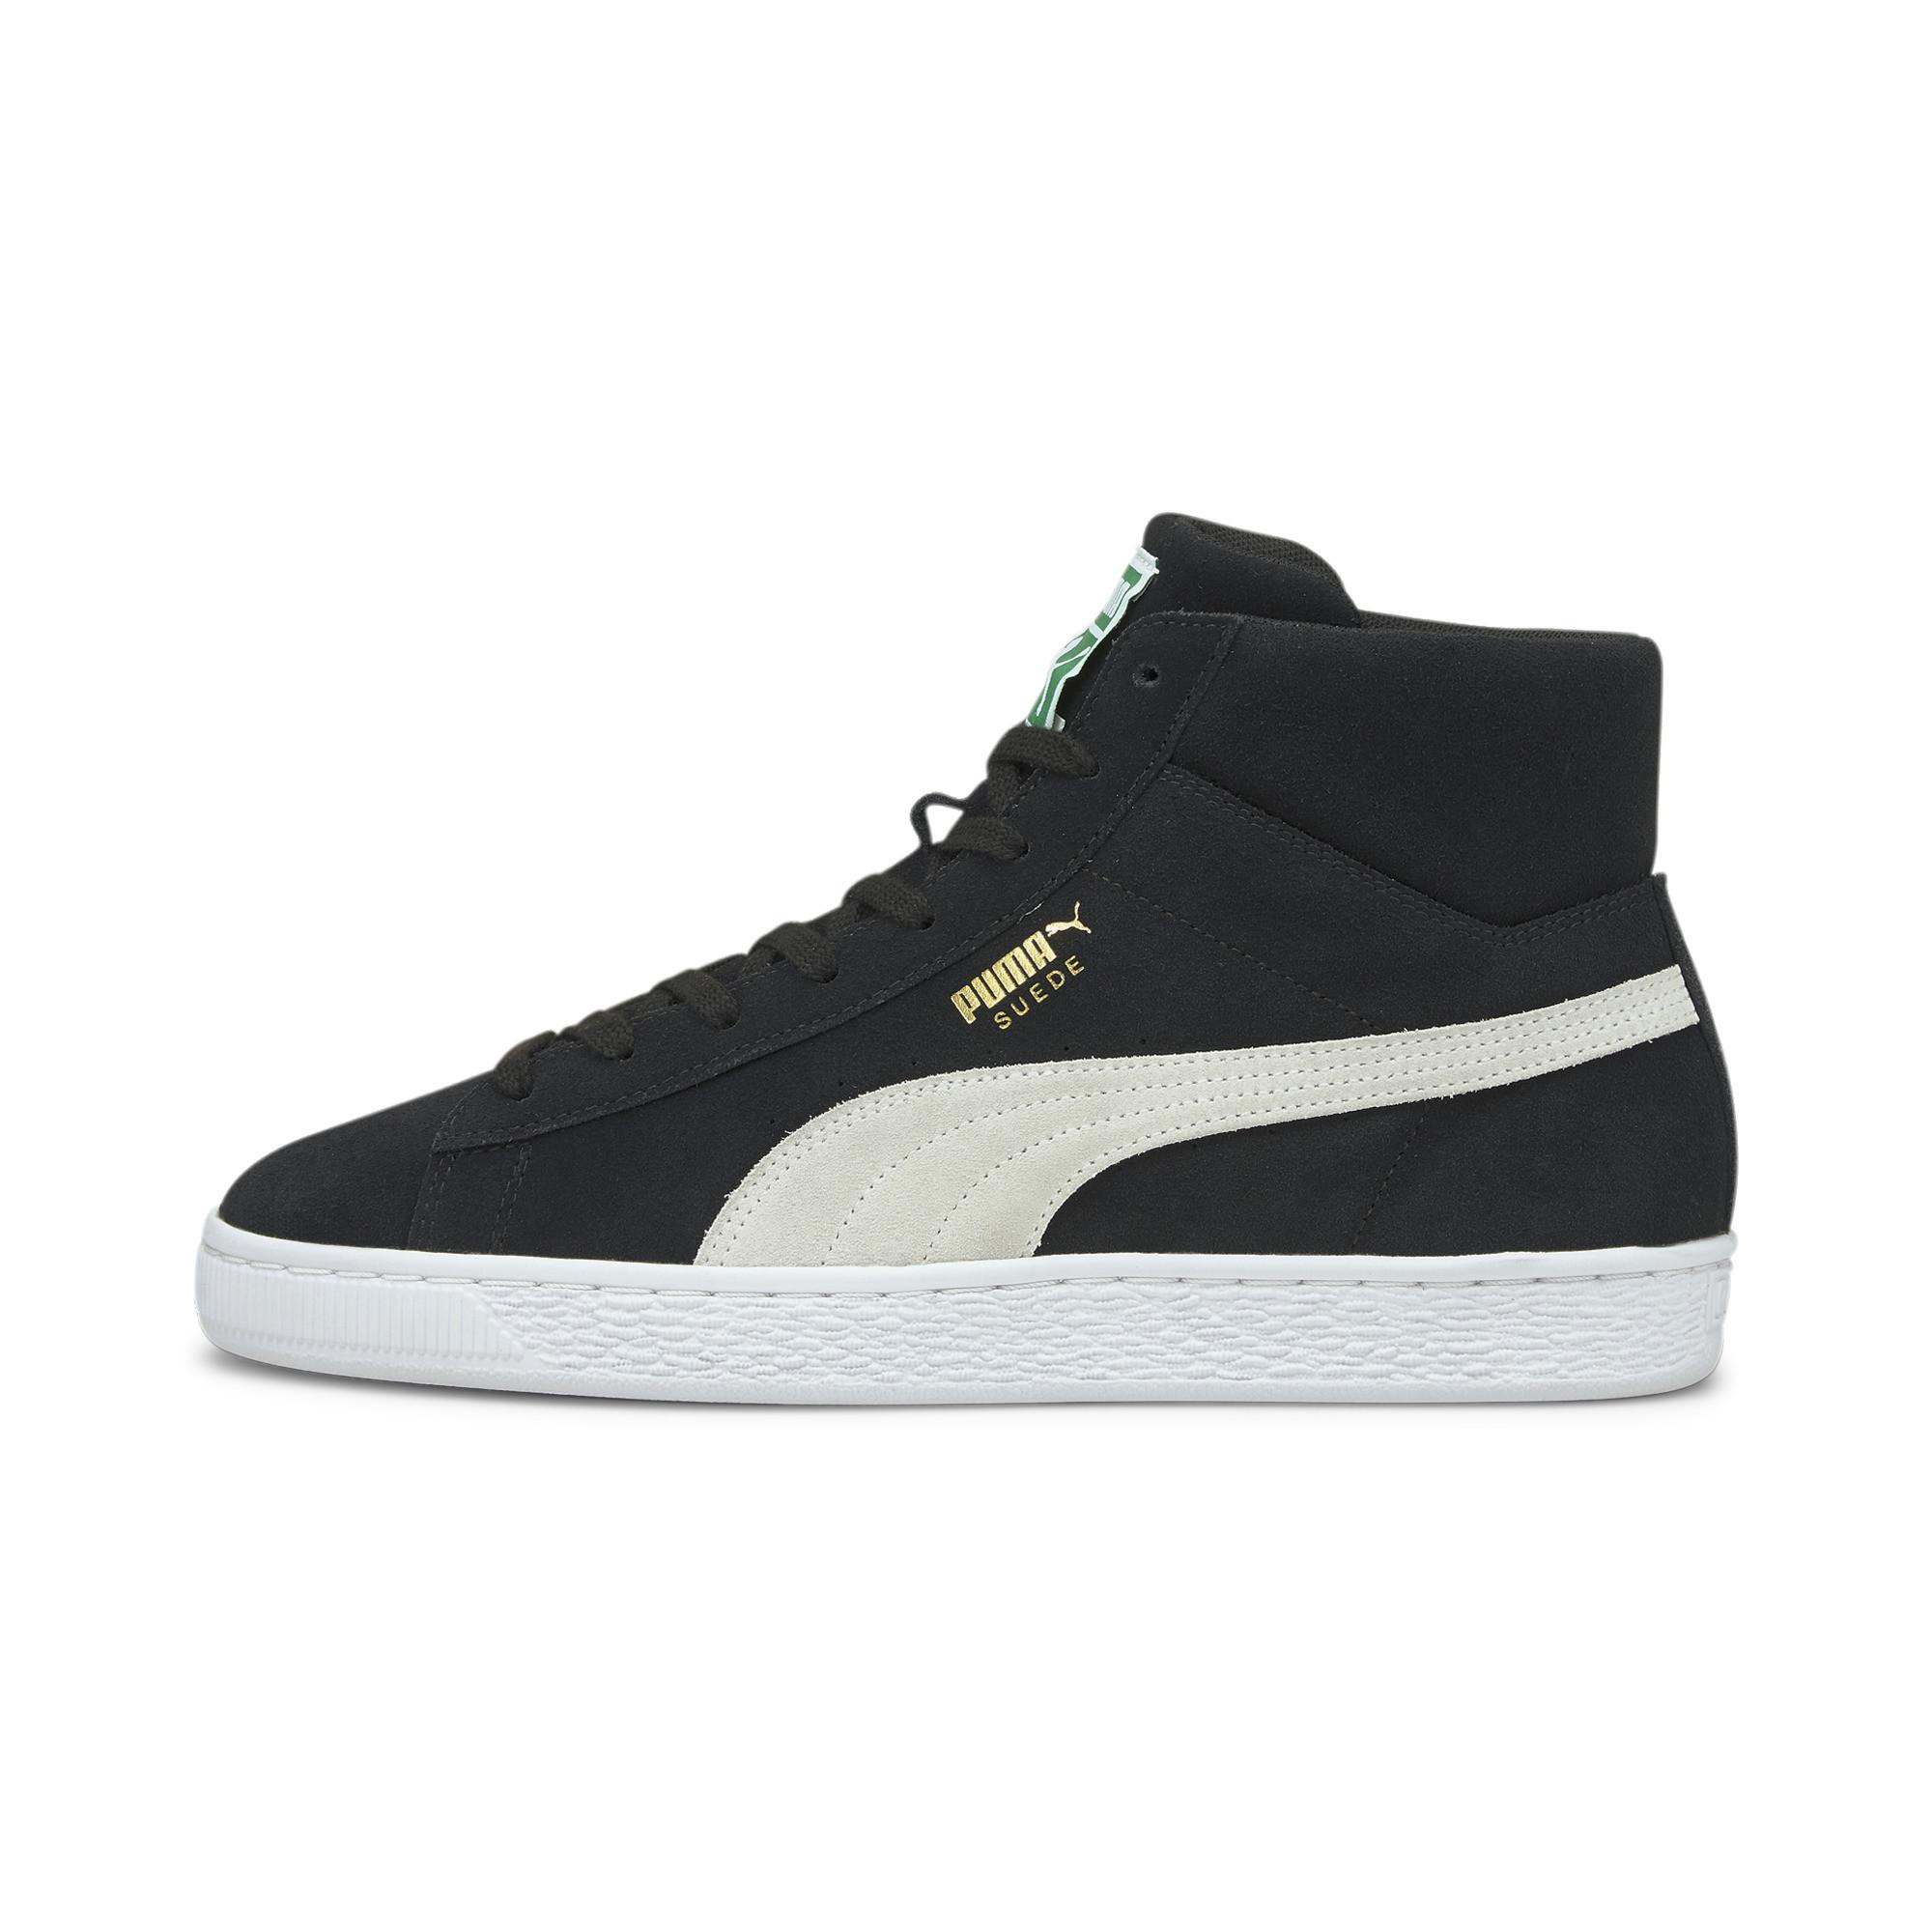 PUMA Suede Mid Xxi Sneakers in Black for Men - Lyst